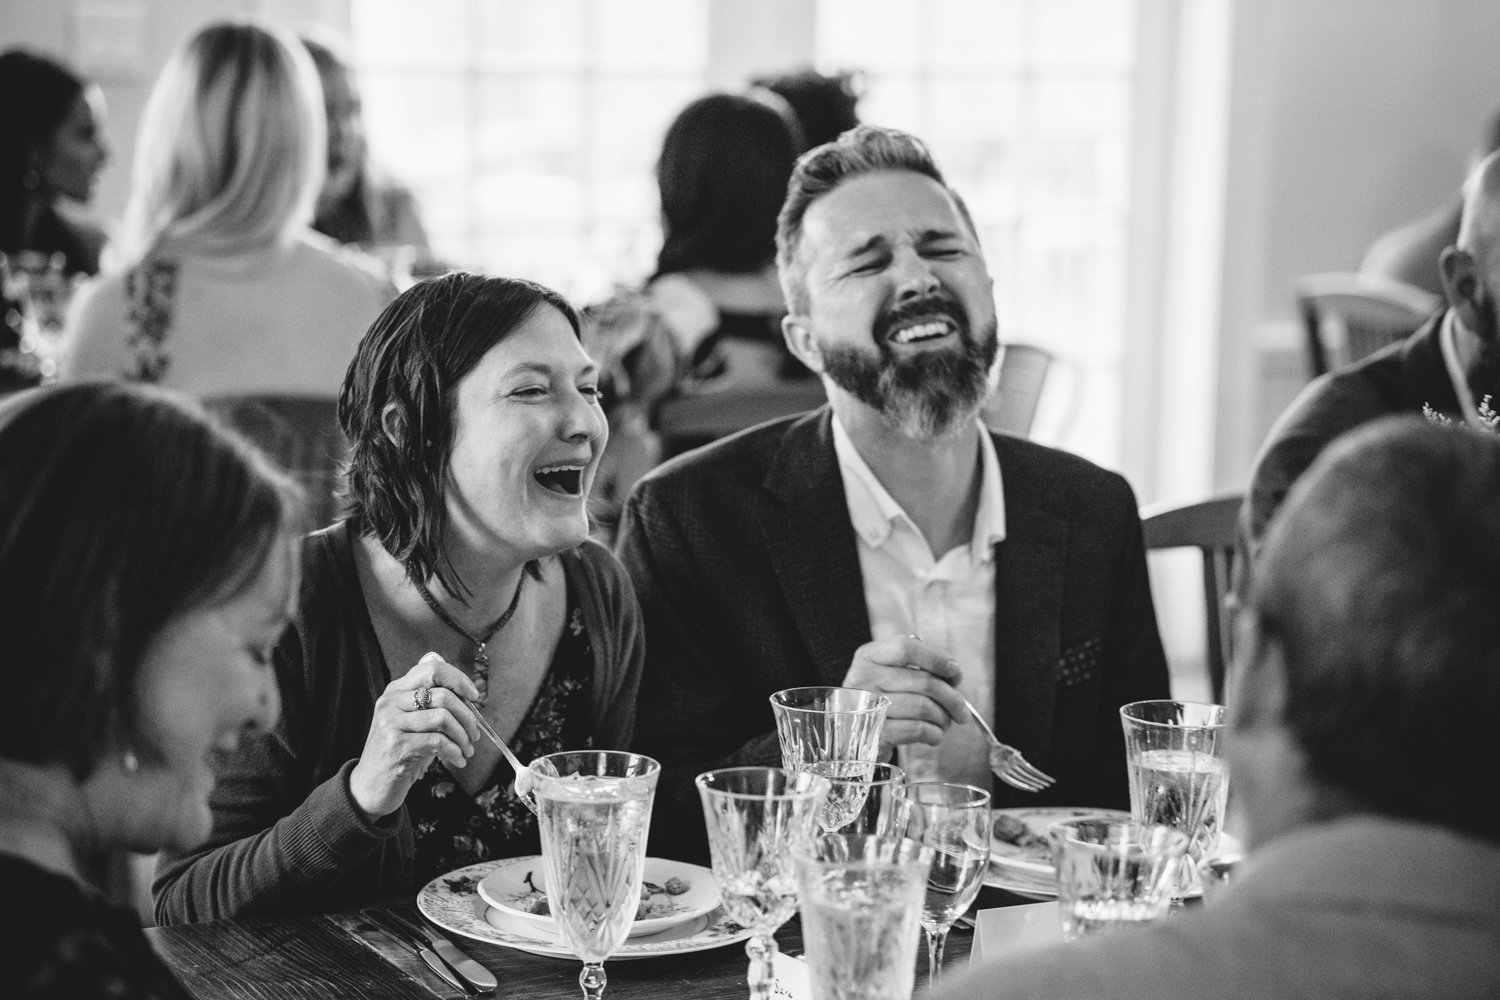 Wedding guests laugh as they eat their food at the wedding reception.

Upstate New York Wedding Photography. Cold Spring NY Wedding Photography. Luxury Local Wedding Photographer. Destination Wedding Photographer.